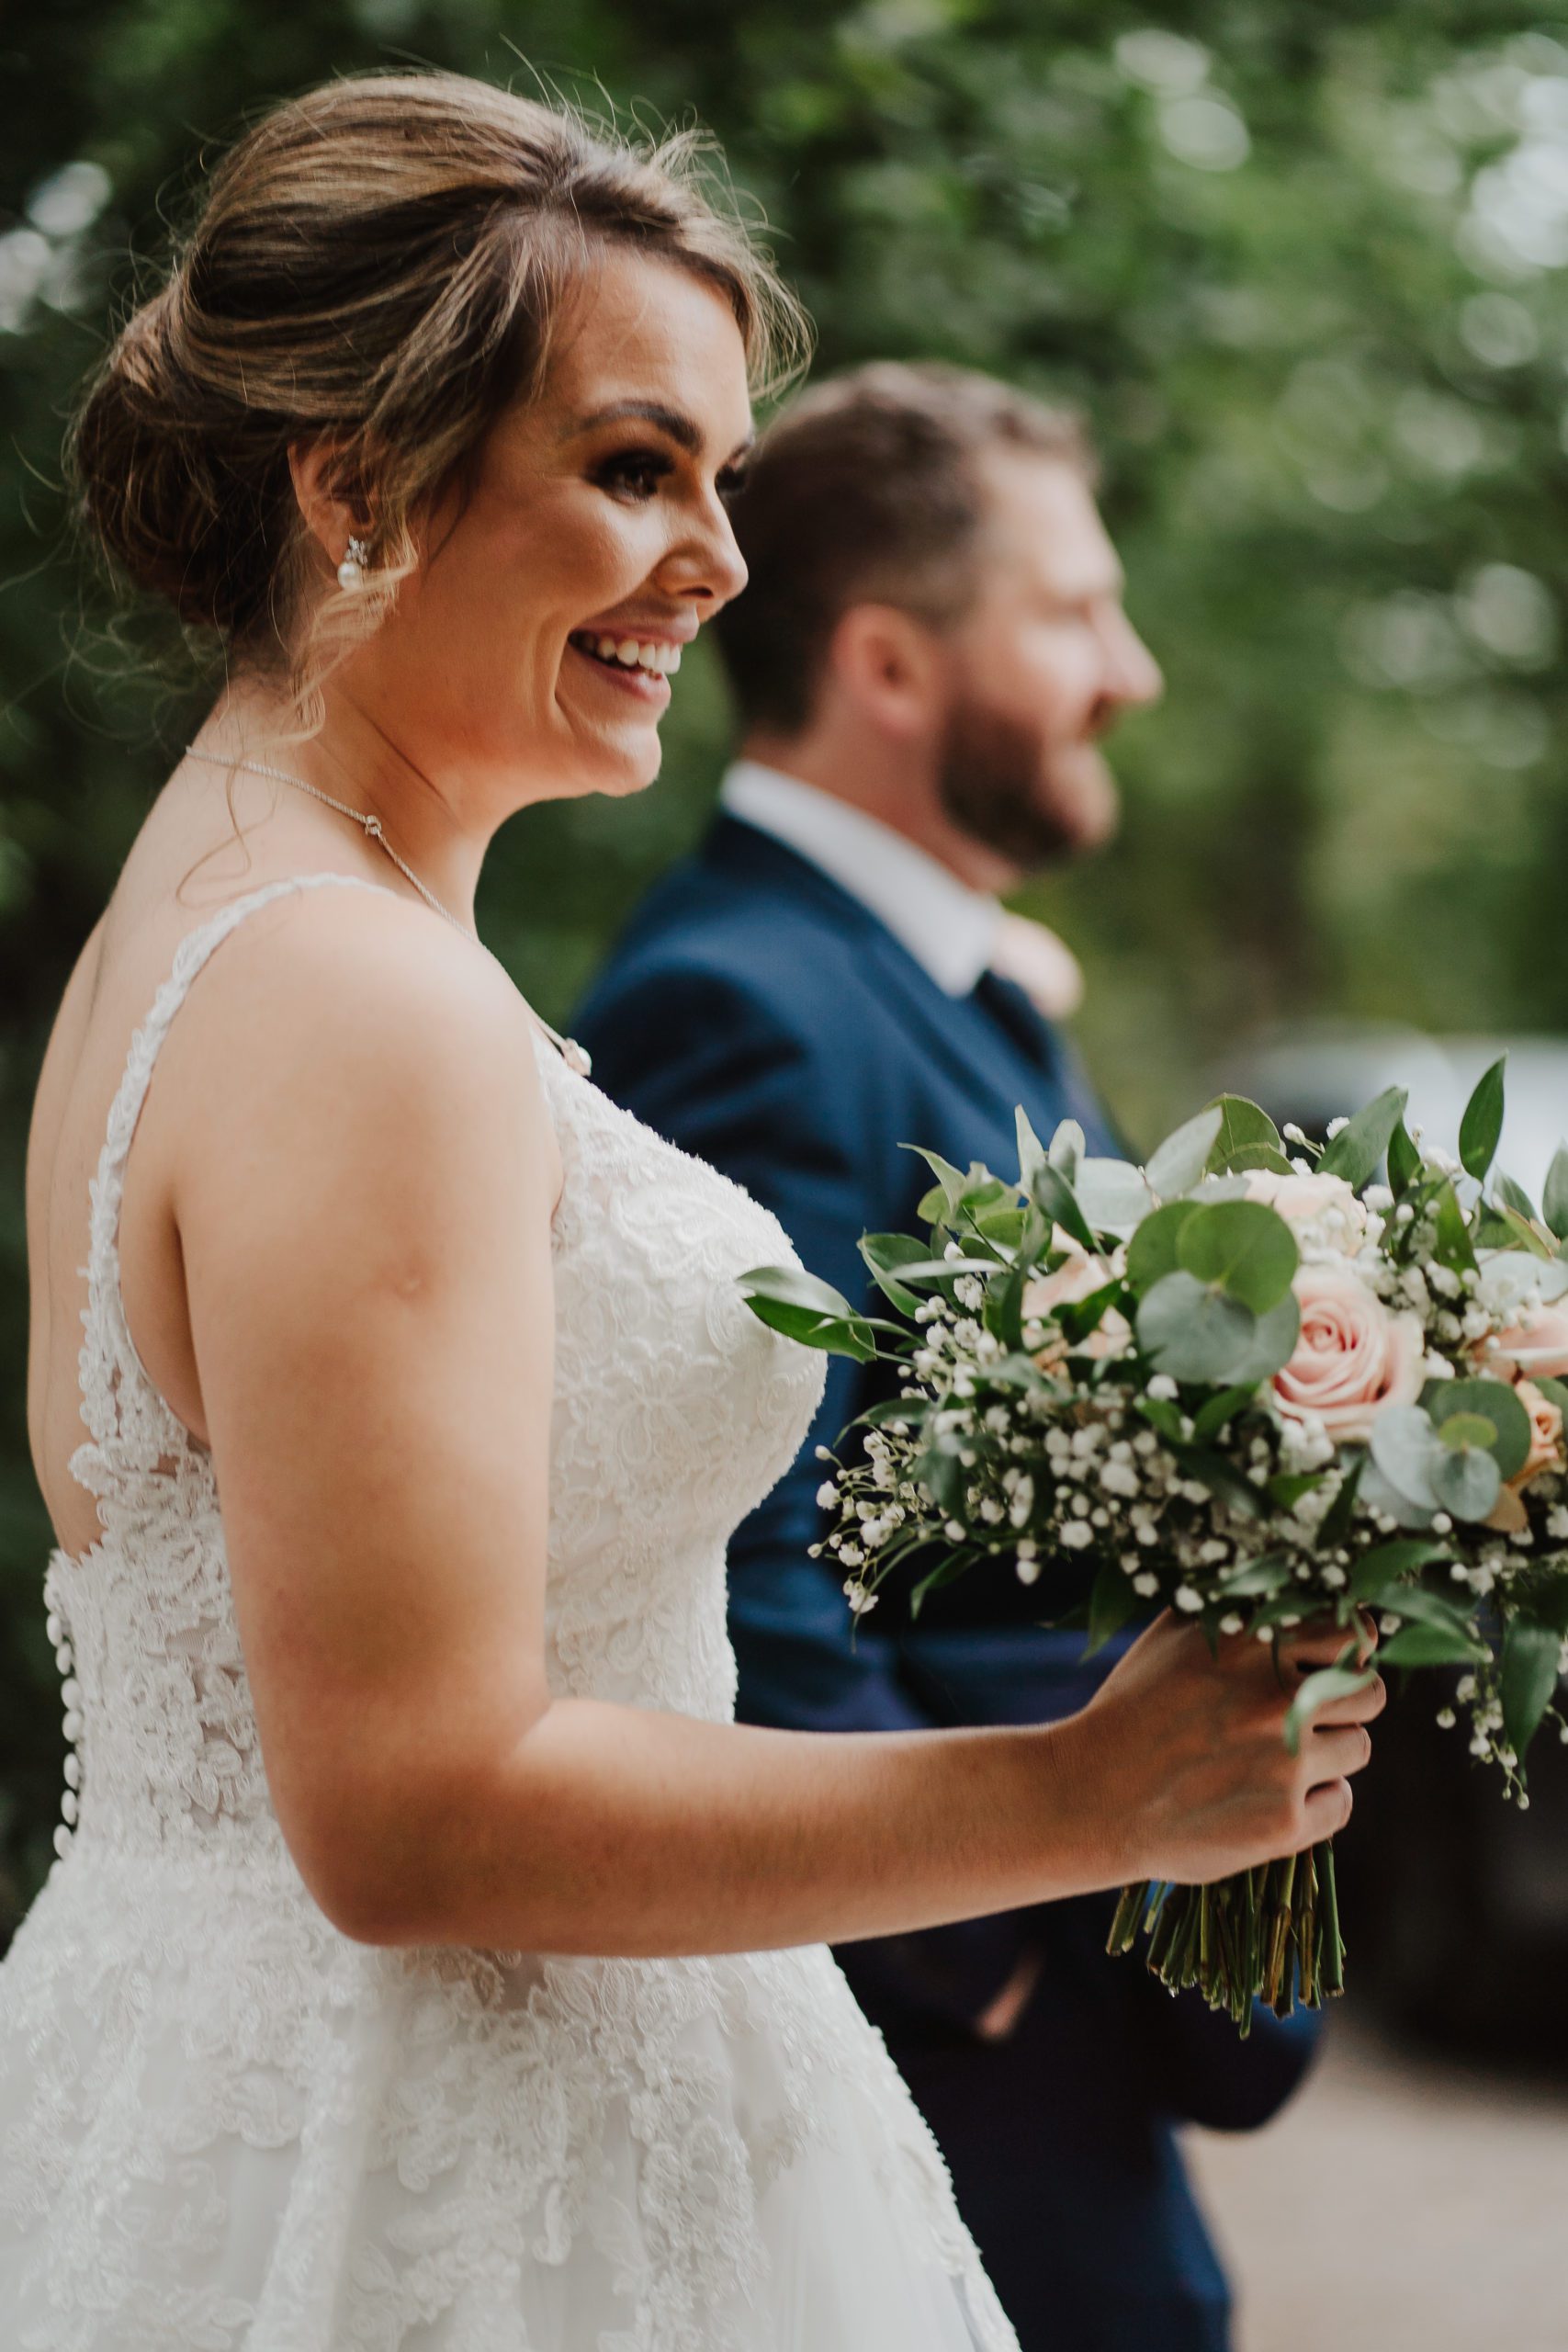 Bride holds bouquet of peachy pink roses smiling with groom out of focus in the background.